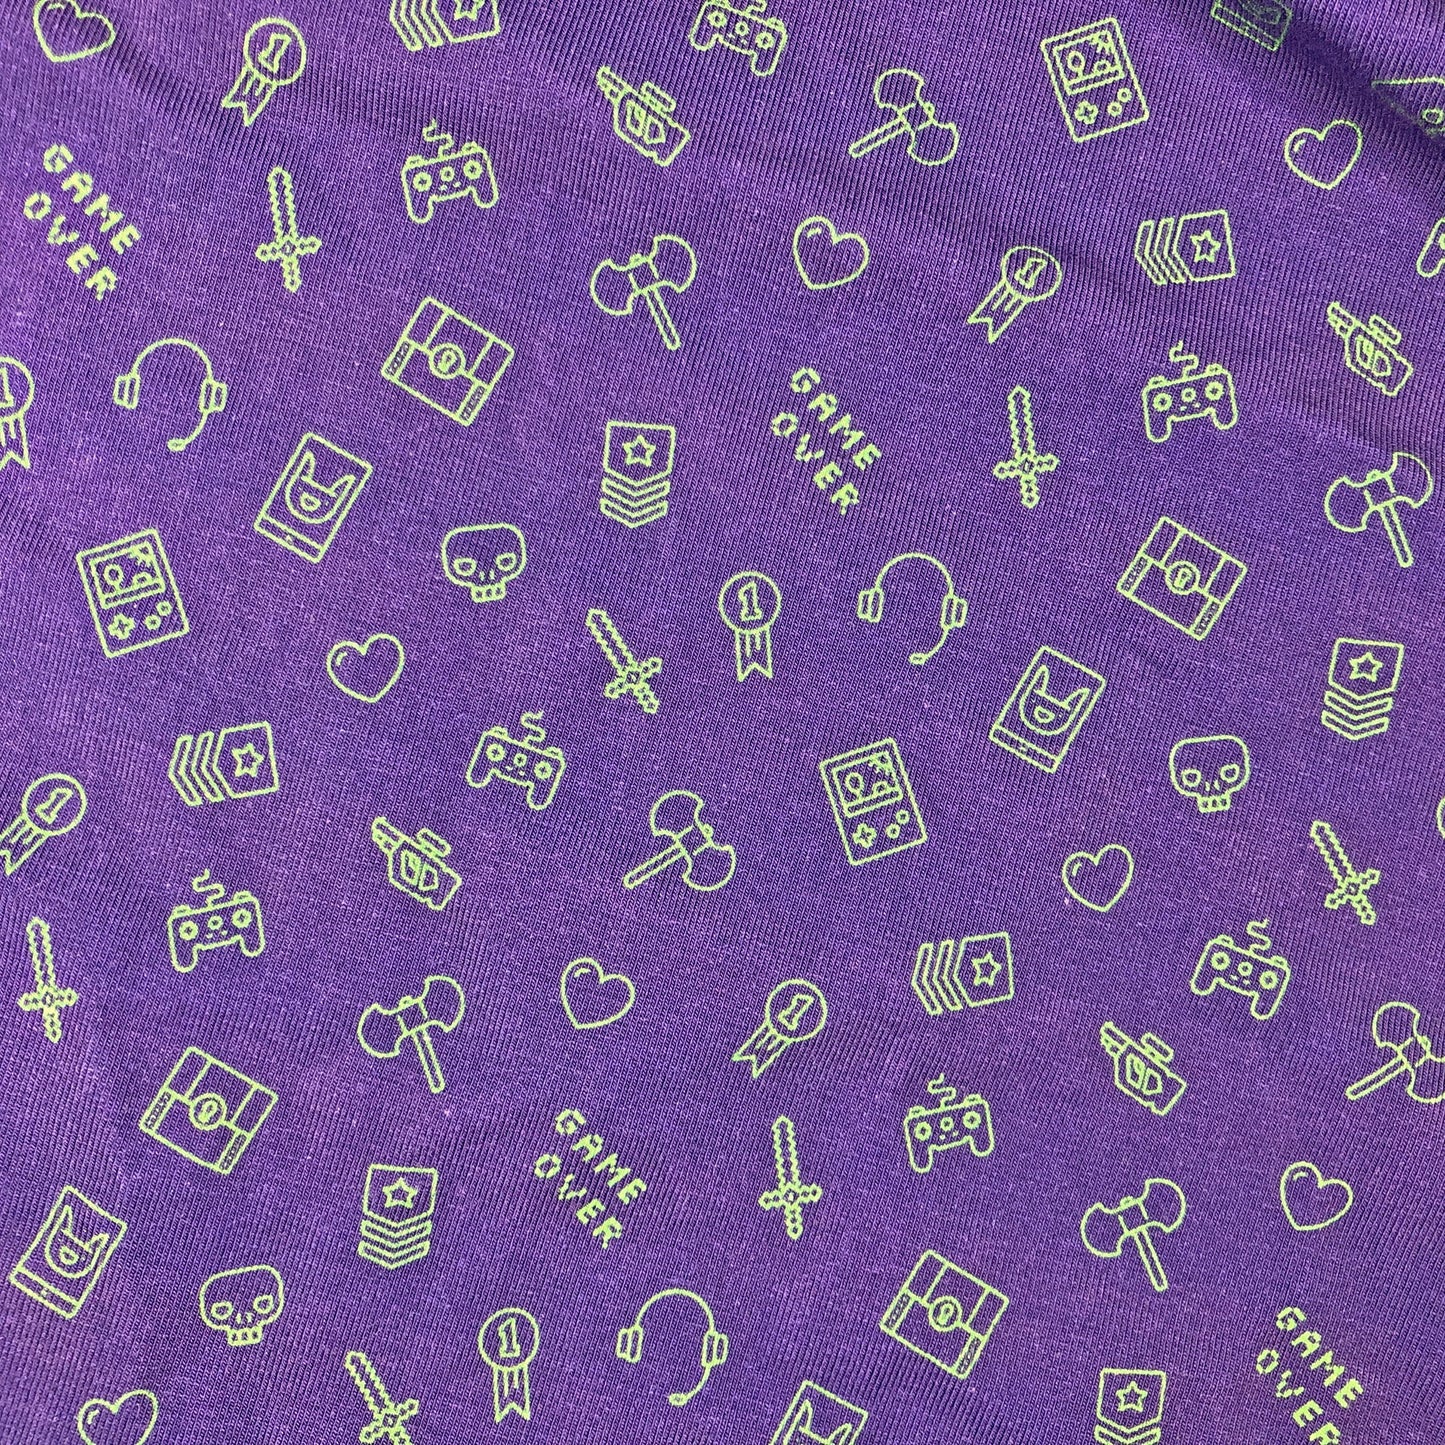 gaming icons on a bright purple background